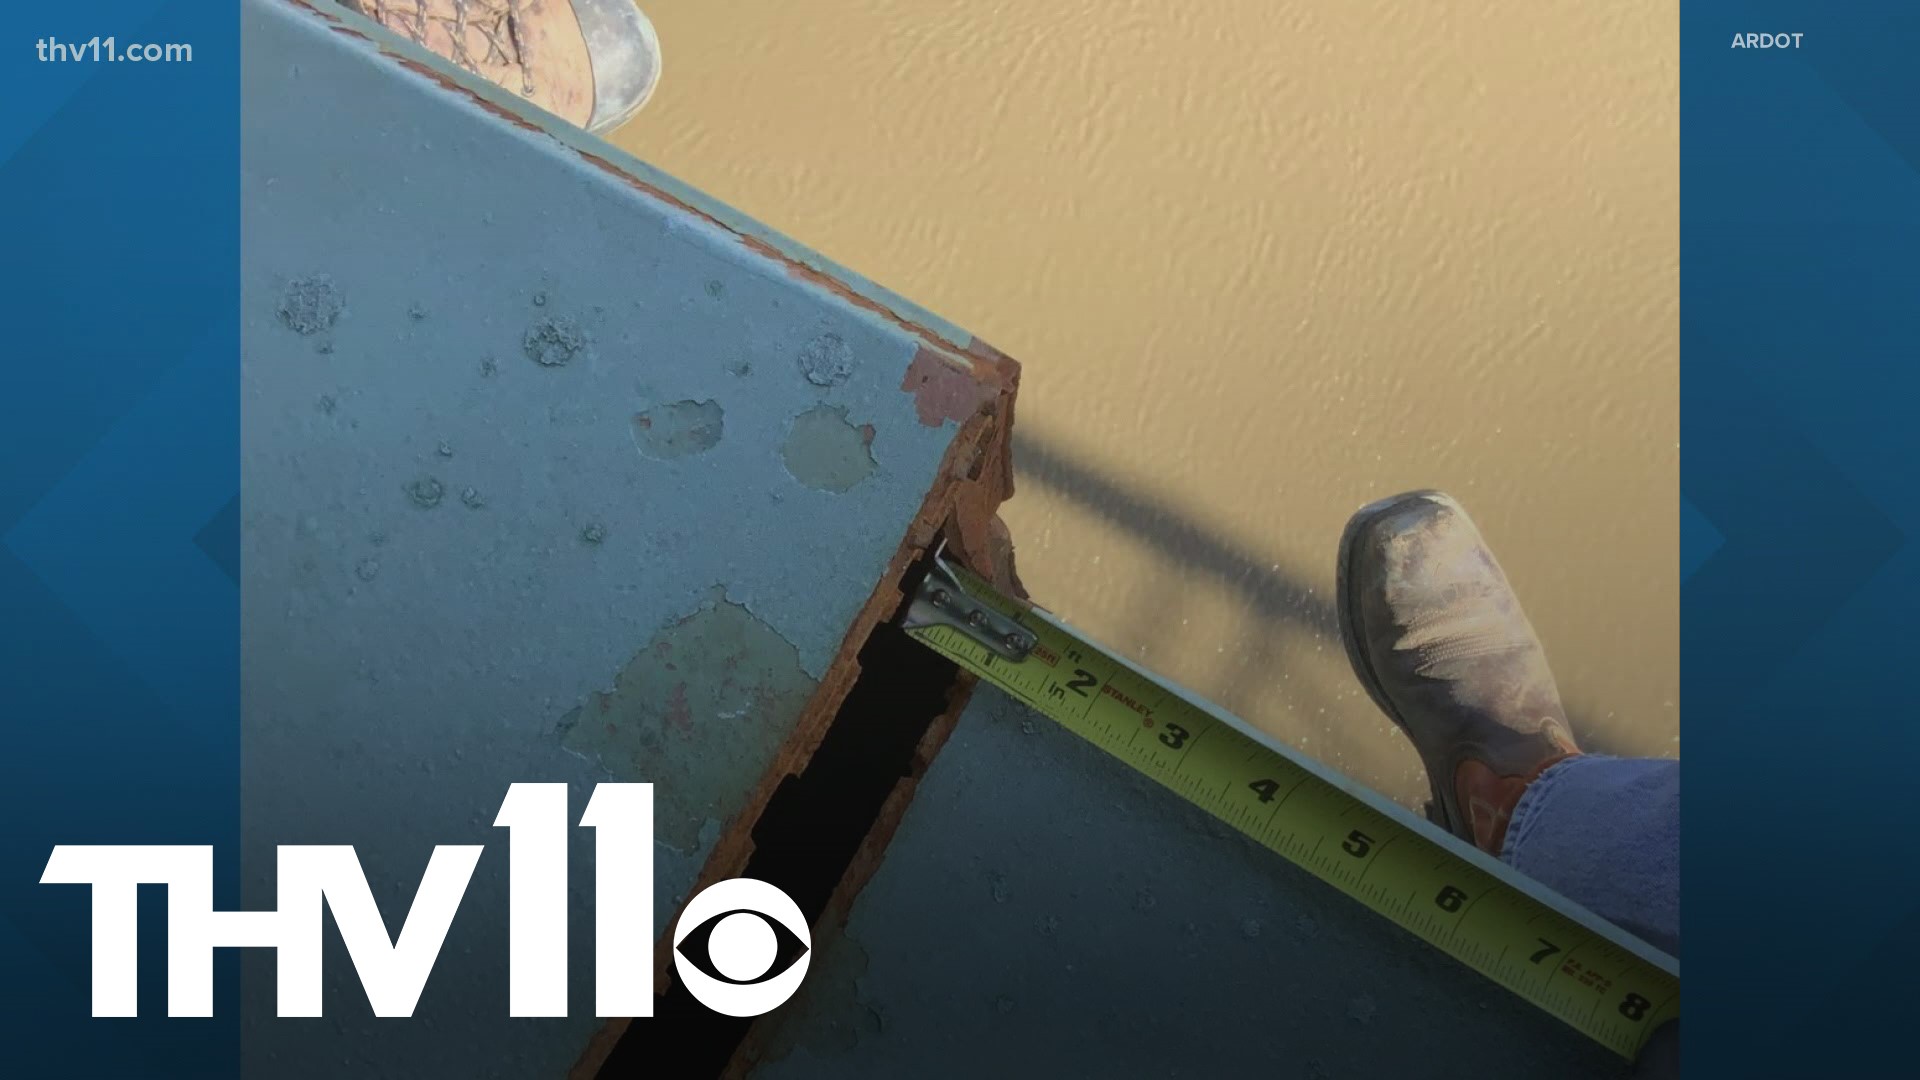 It's bee almost a week since inspectors found a crack on the I-40 bridge between Arkansas and Tennessee.